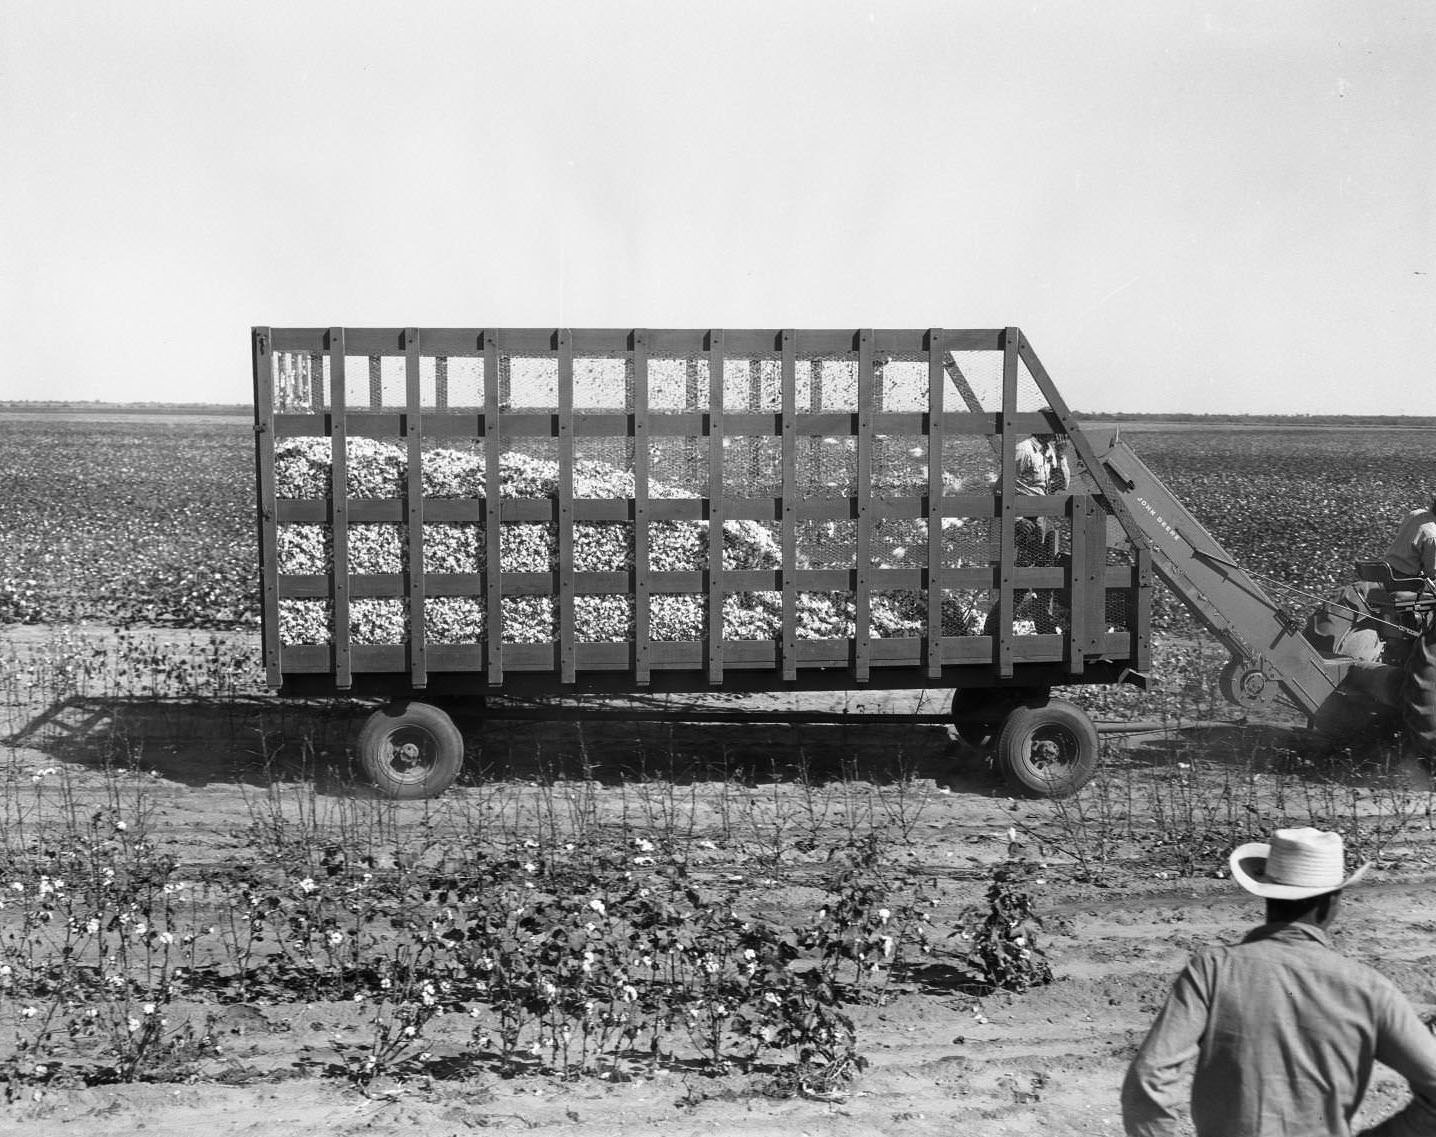 A tractor and trailer of cotton in a field, 1958